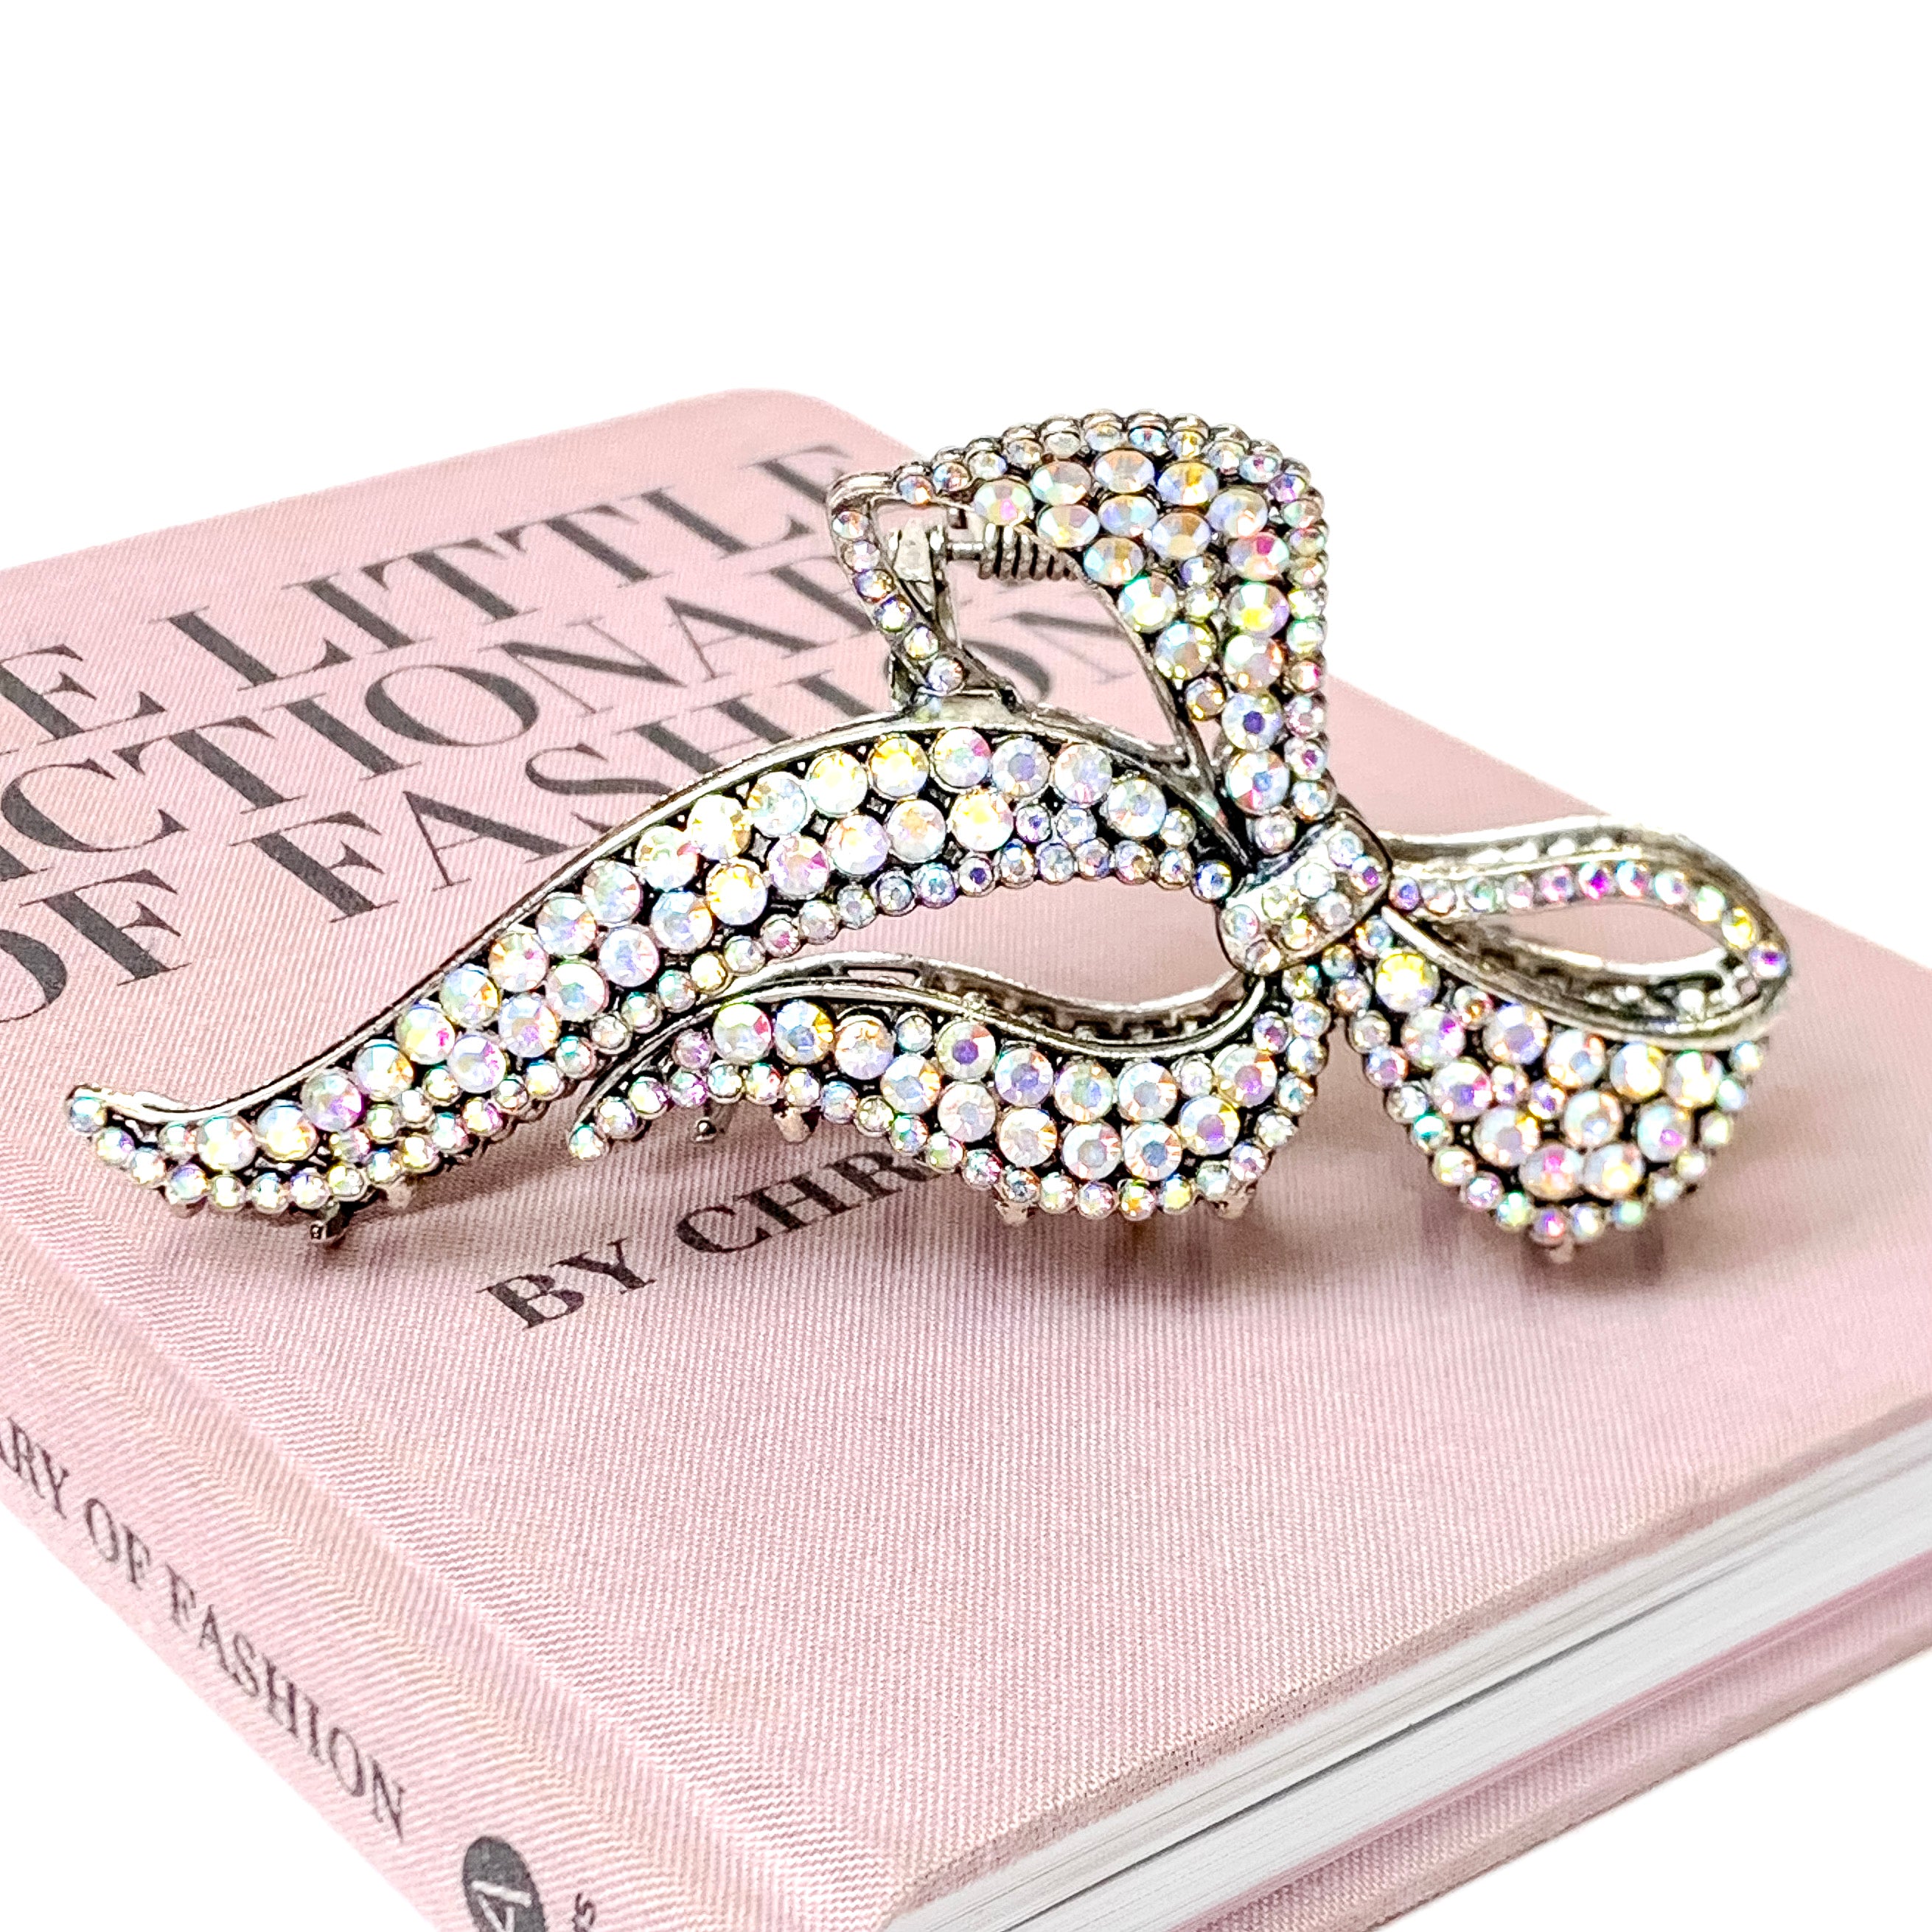 AB Crystal Embellished Metal Bow Shaped Metal Hair Clip in Silver - Giddy Up Glamour Boutique